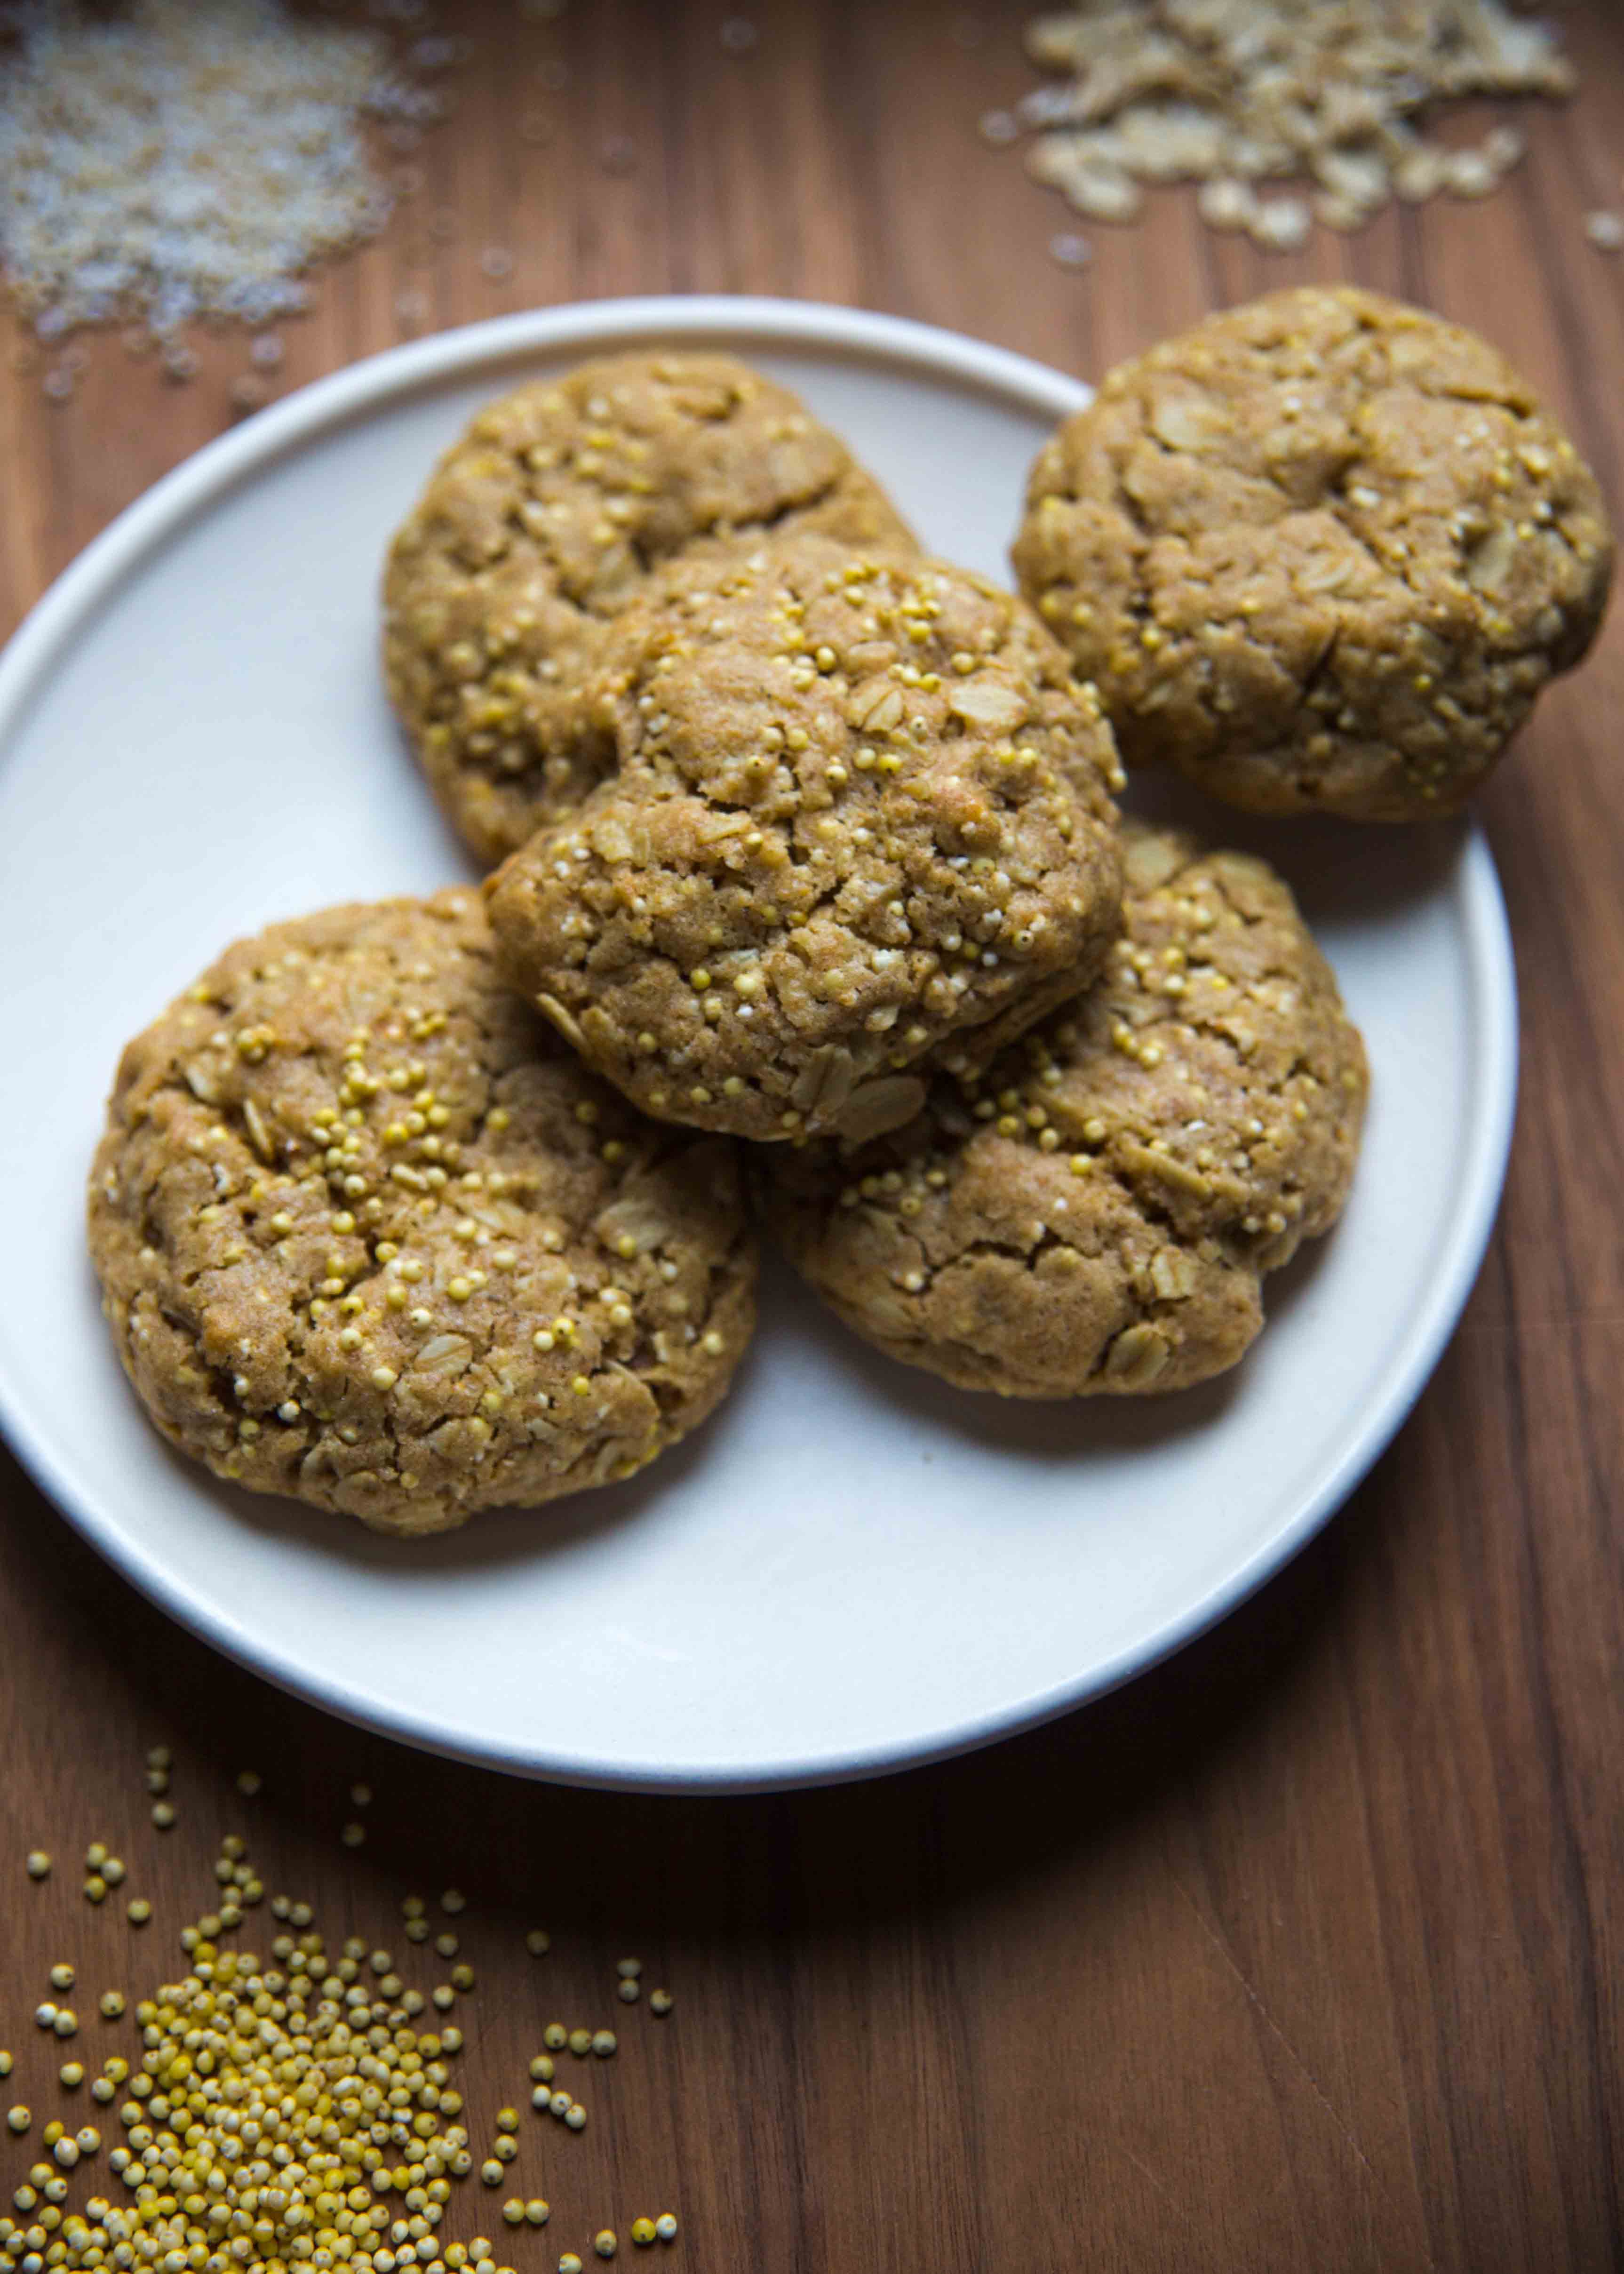 Add cooking amaranth to your to-do list. Here popped amaranth gets baked into a Four Grain Breakfast Cookies recipe that also includes a variation for banana breakfast cookies.